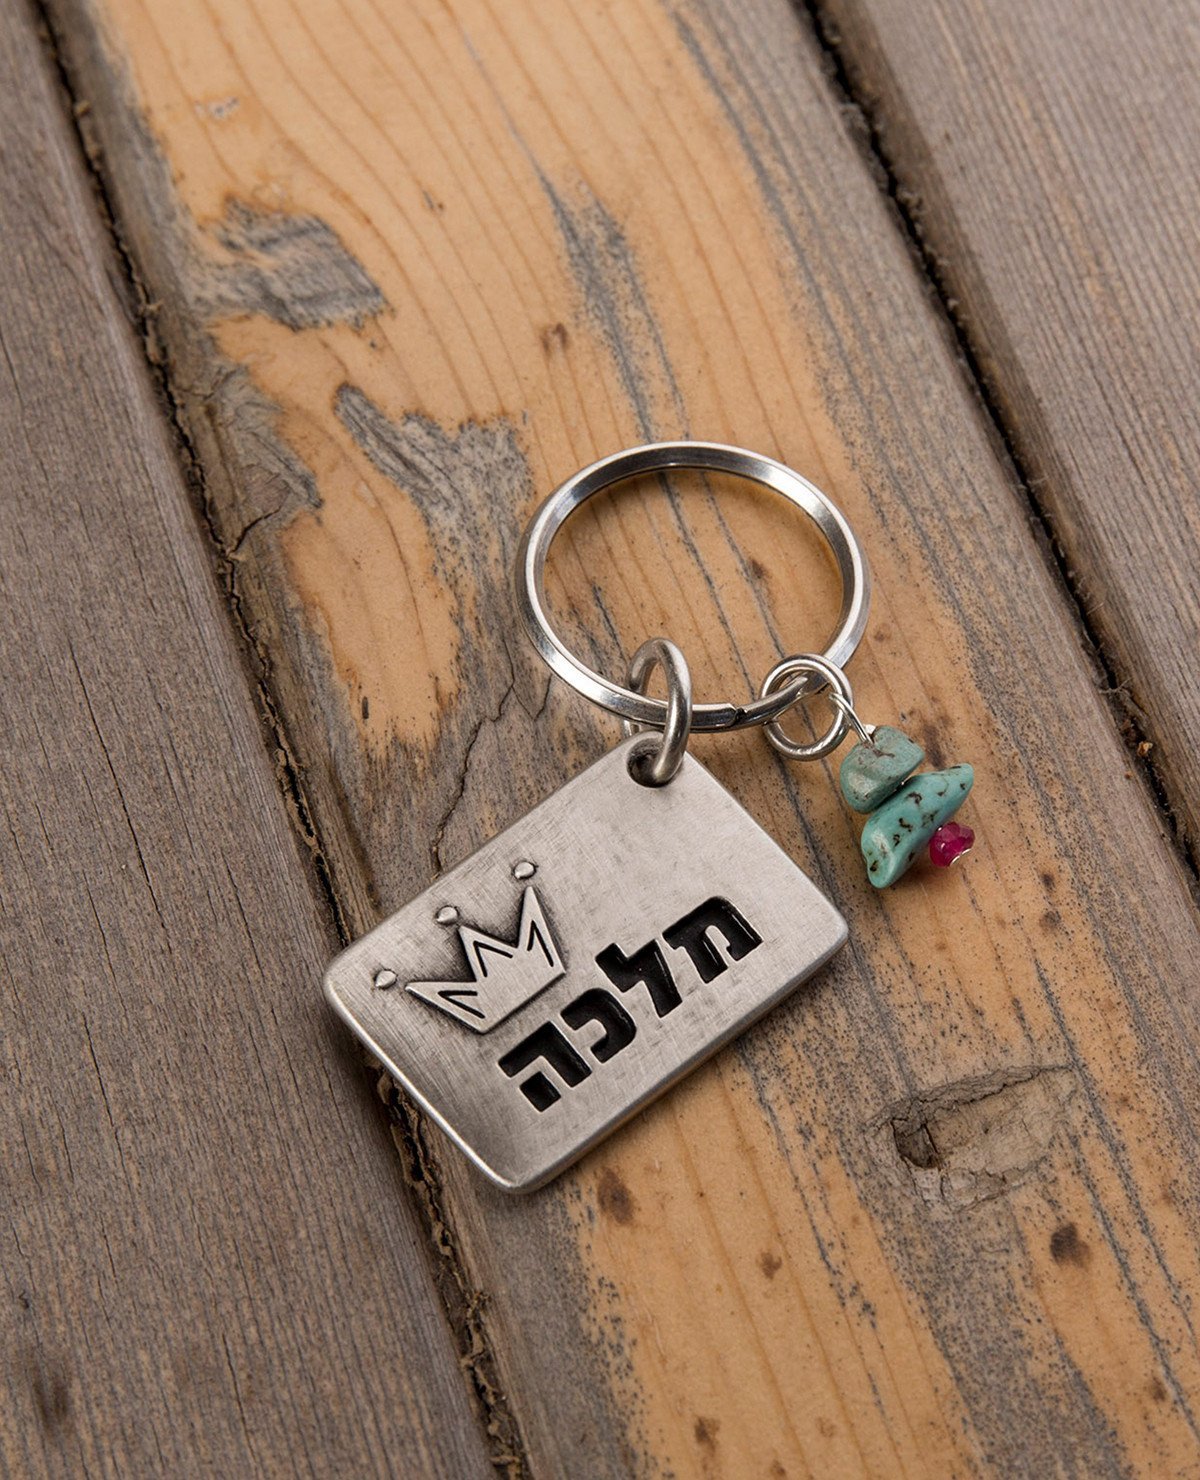 A majestic and meaningful keychain, intended specifically for your queen. Designed as a rectangle coated in sterling silver, with the word "Queen" written on one side, along with an embossed crown. On the other side is an embossed crown. Next to the rectangle hang three colorful beads. The keychain is strong and reliable. Makes a great gift that says it all, for the queen who is only yours.   Length: 3 cm  Width: 4 cm